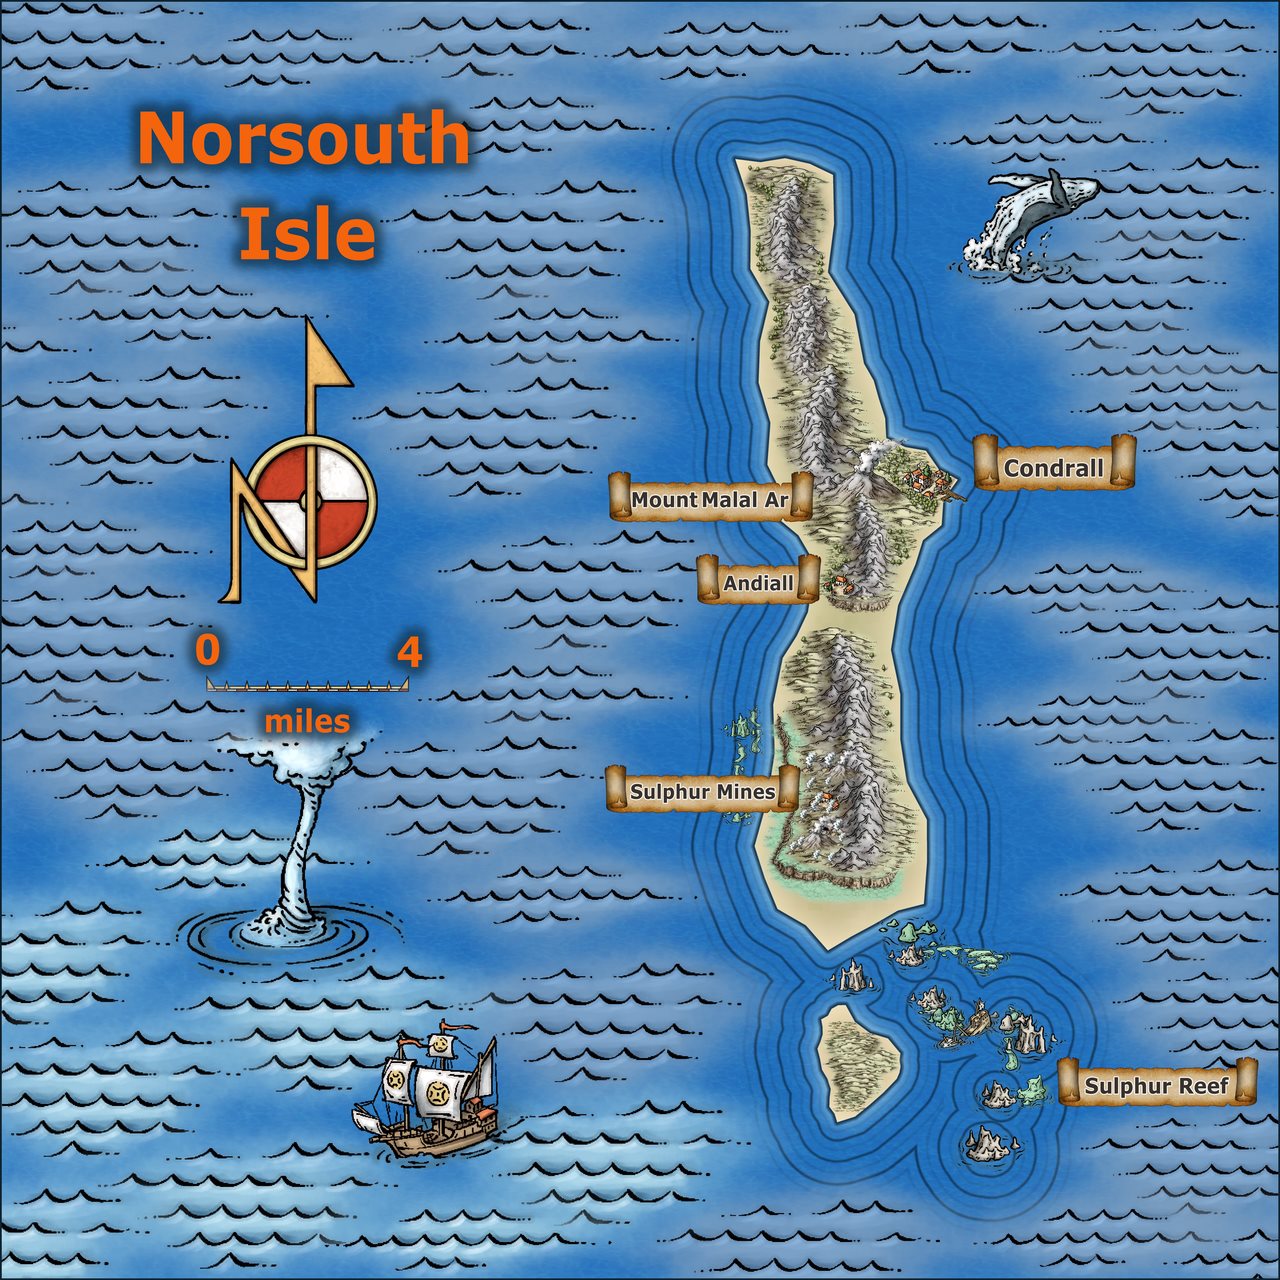 Nibirum Map: norsouth isle by Ricko Hasche